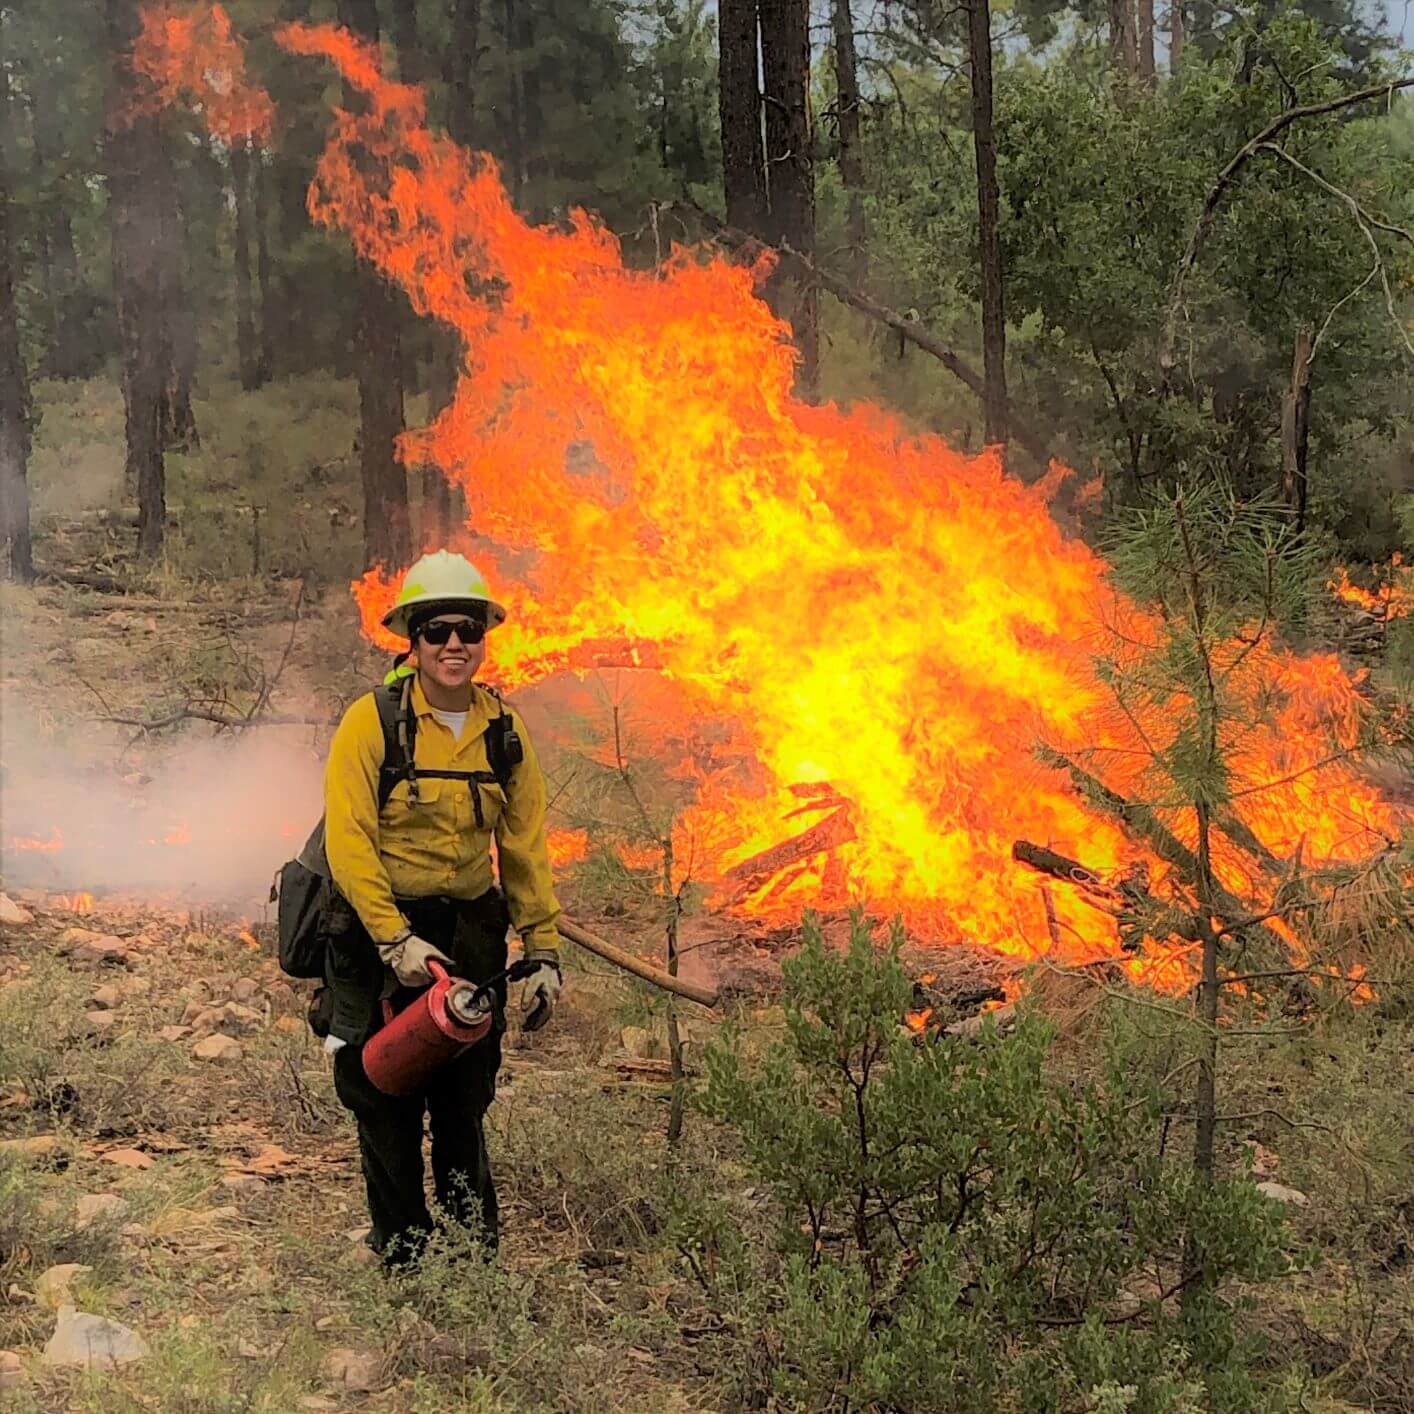 A fuels management specialist works on a prescribed burn.